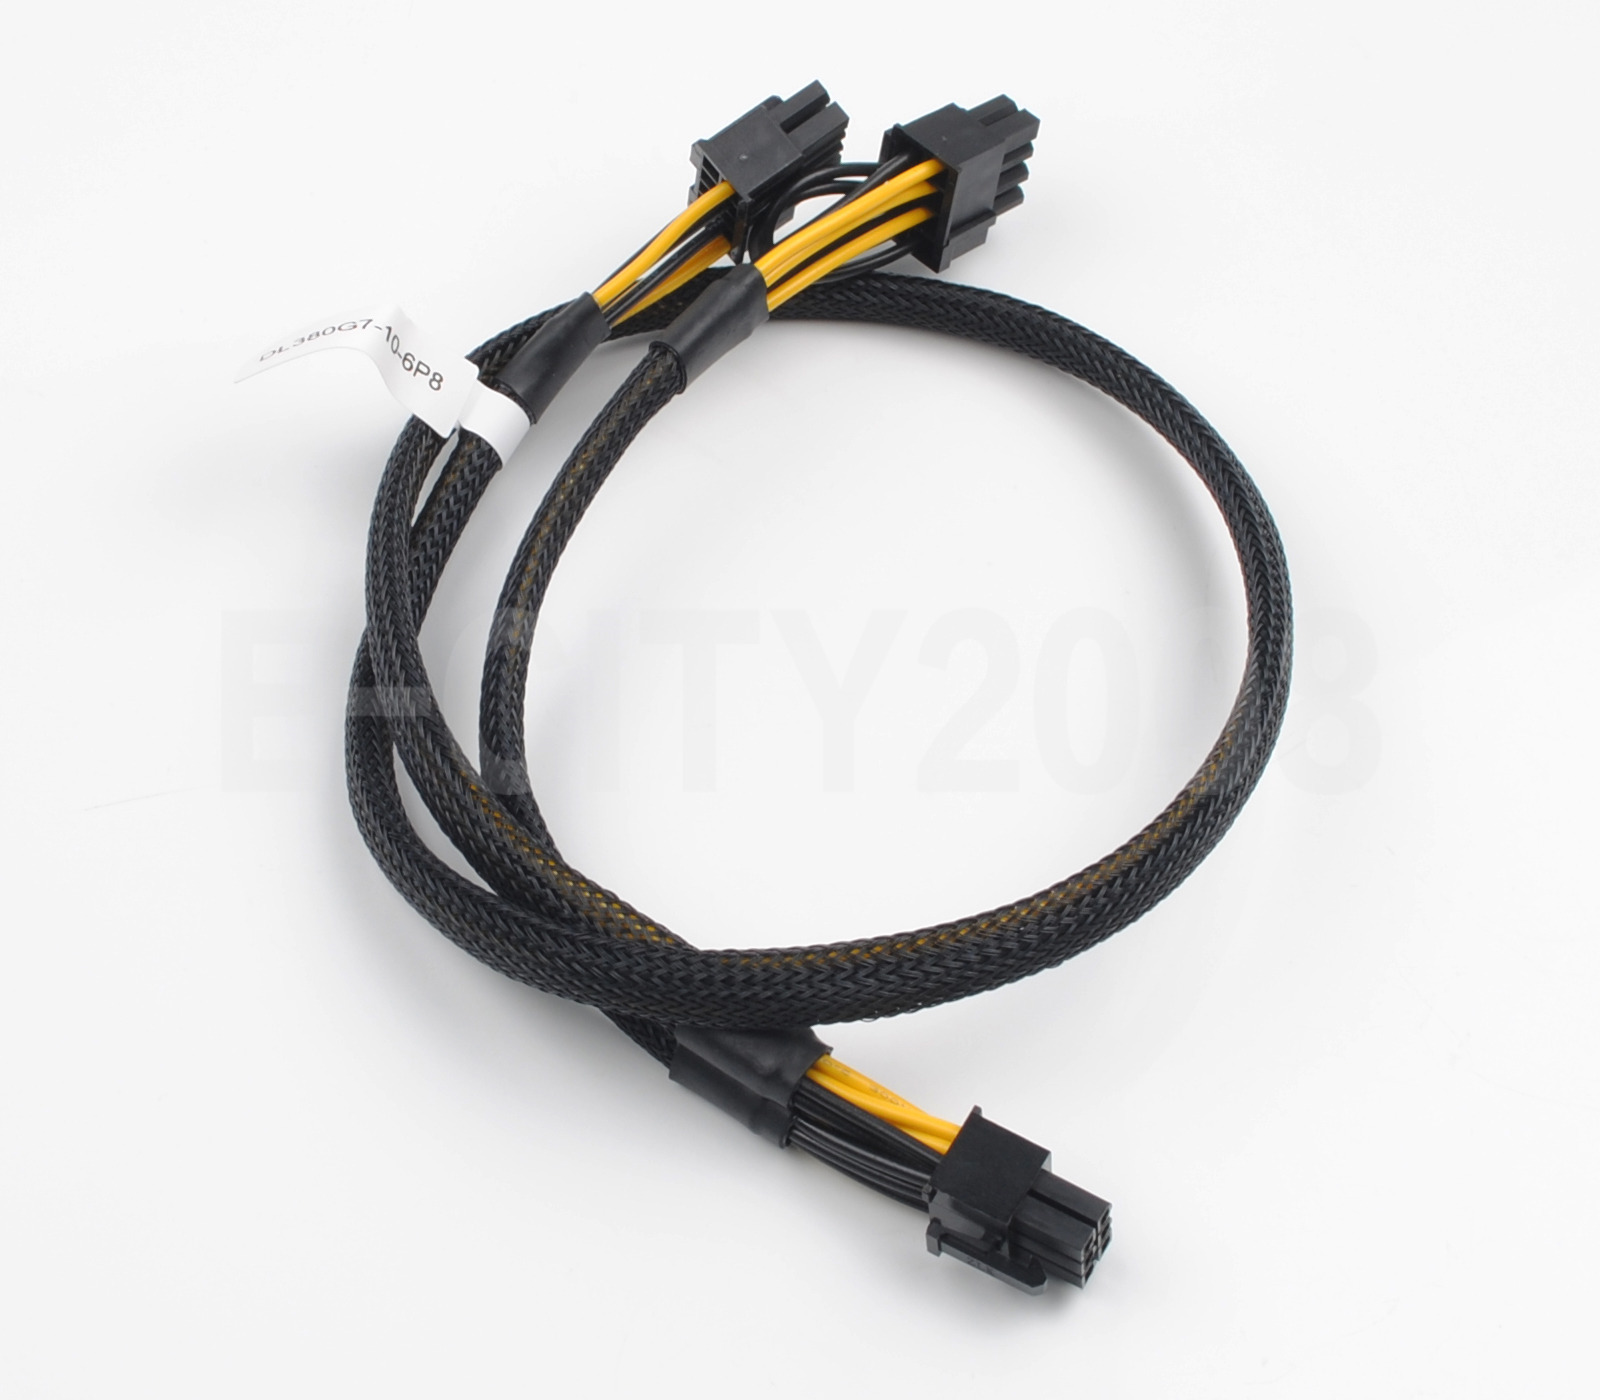 Gpu 10Pin To 6+8Pin Power Adapter Pcie Cable For Hp Proliant Dl380 G7 Server - $25.99